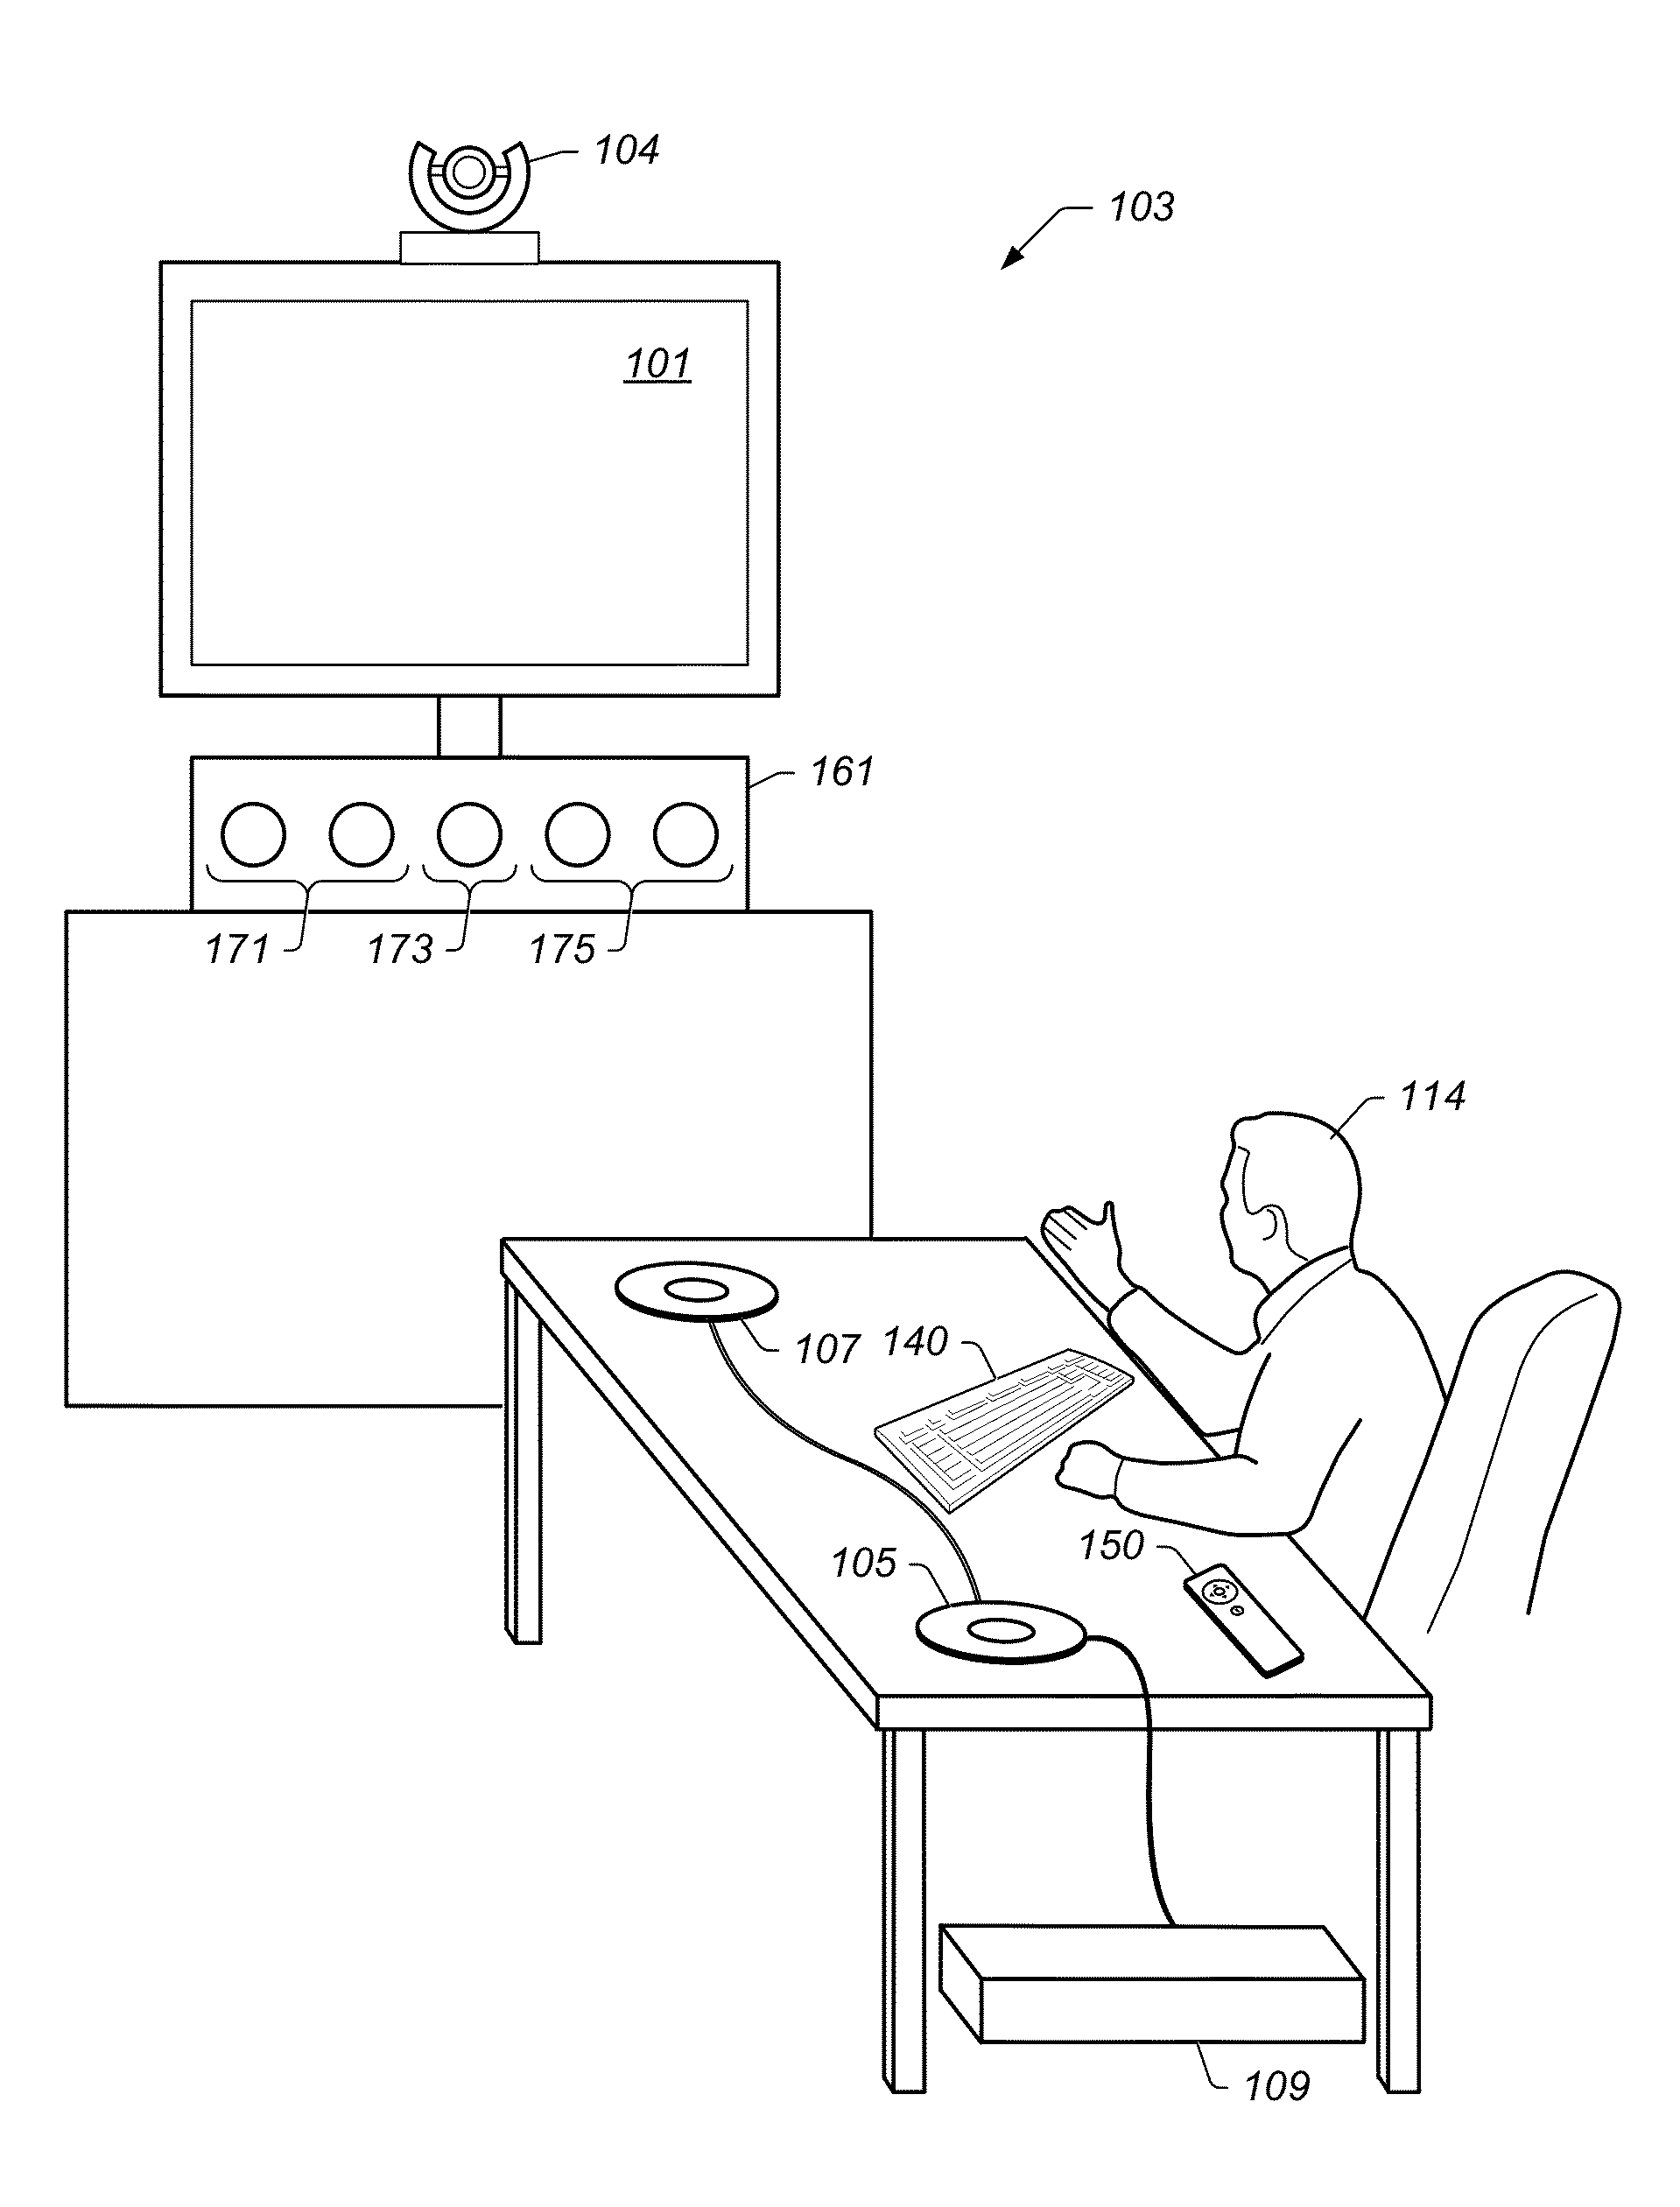 Videoconferencing System with Context Sensitive Wake Features